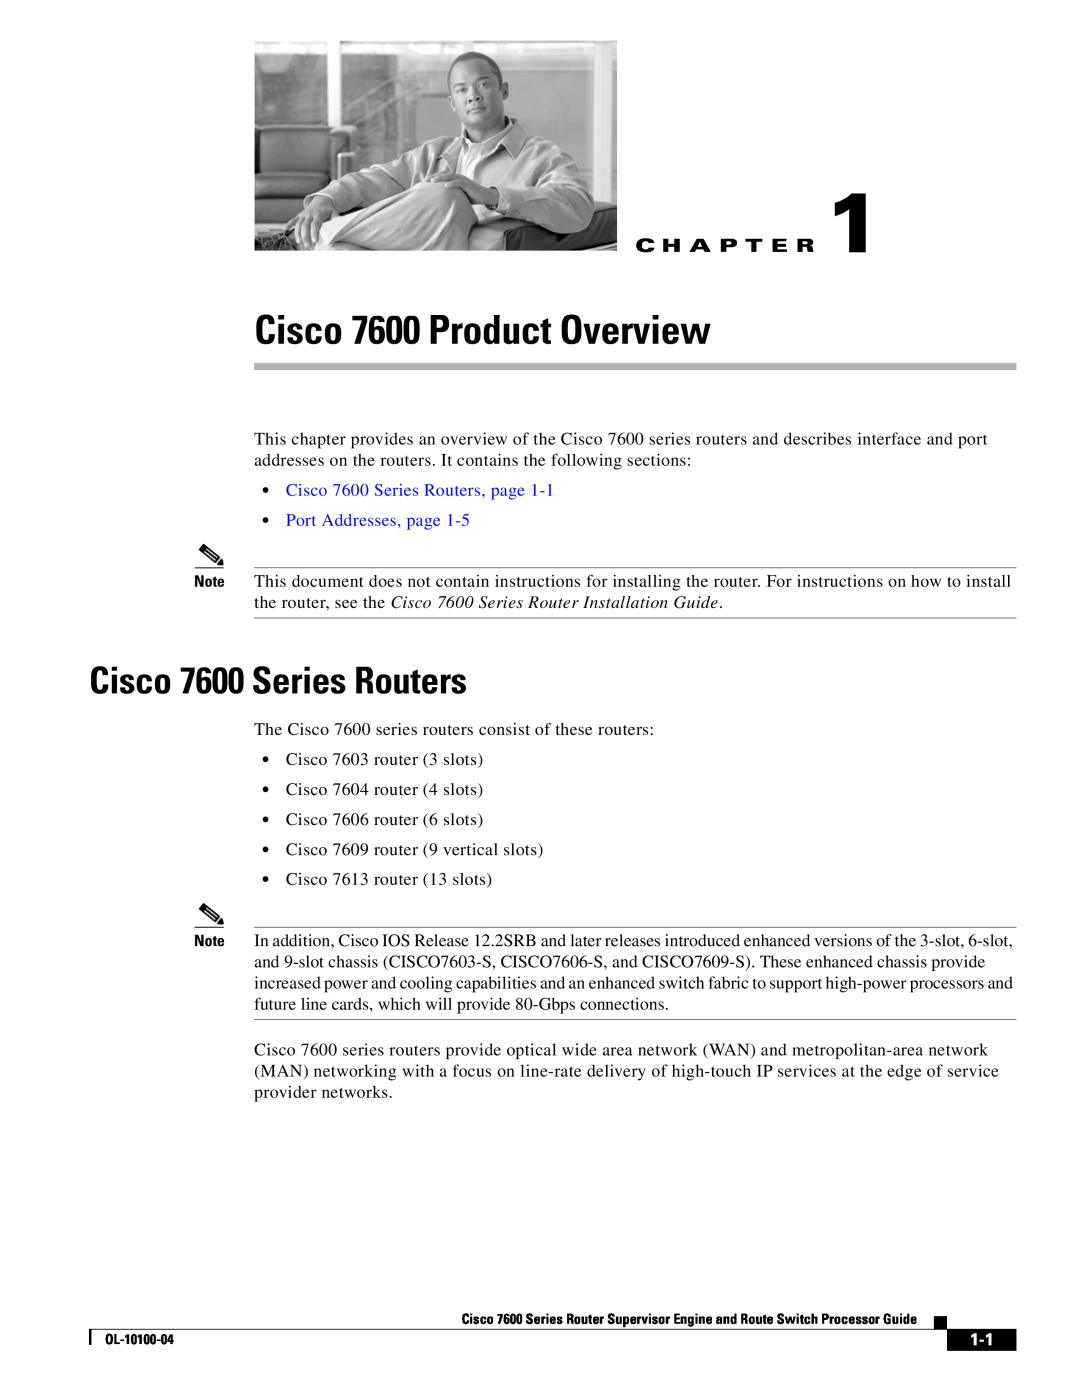 Cisco Systems manual Cisco 7600 Product Overview, Cisco 7600 Series Routers, C H A P T E R 